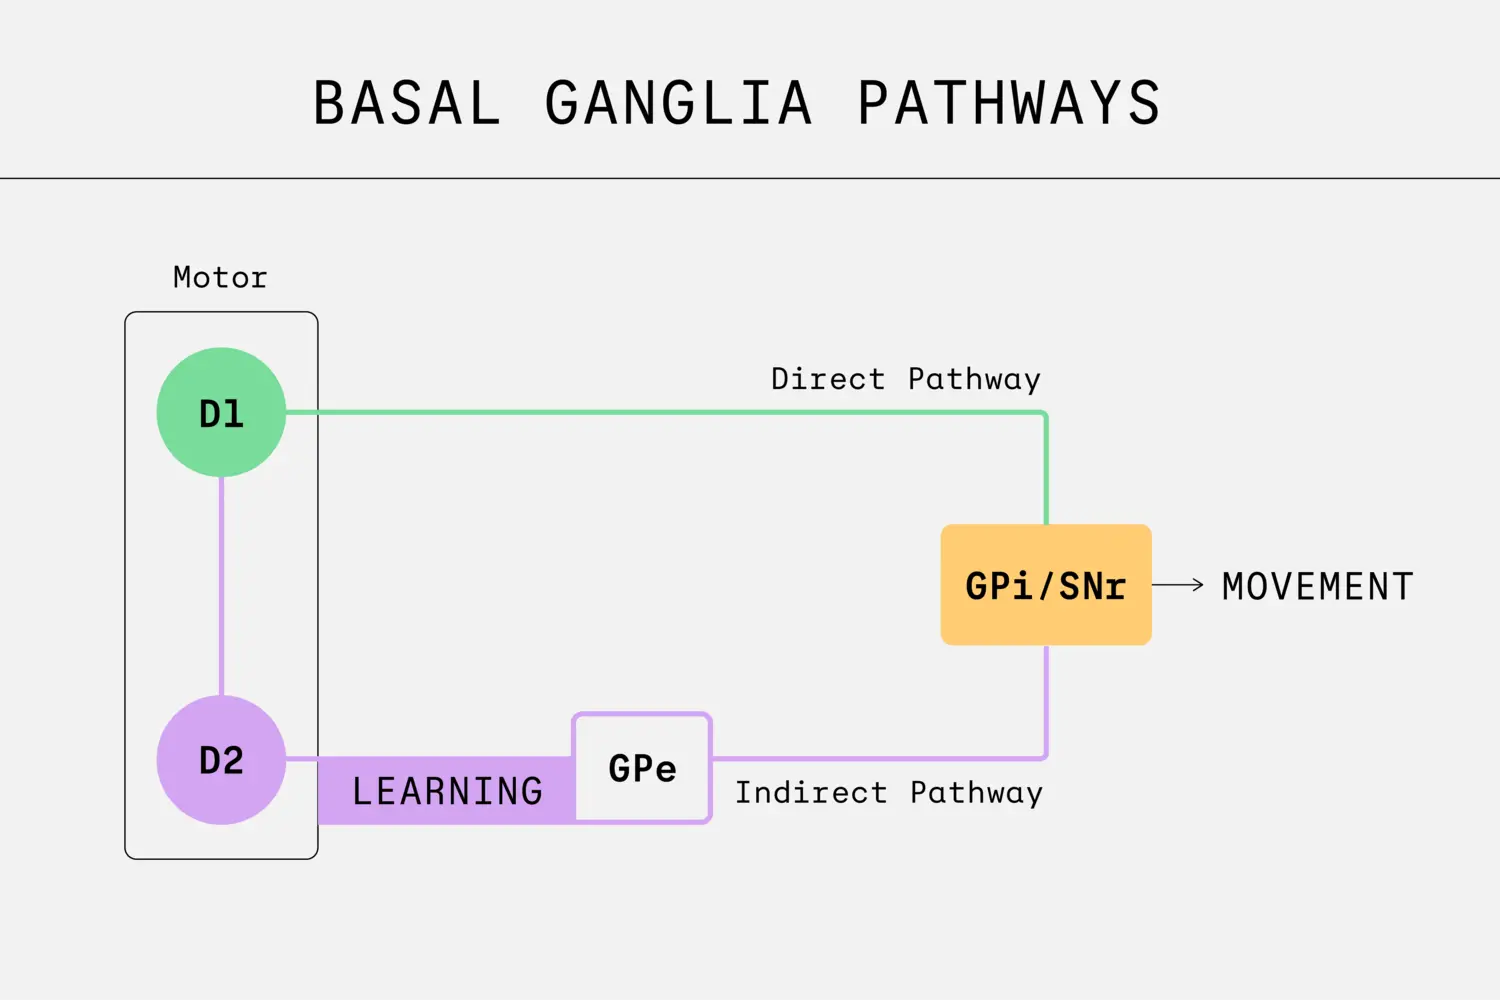 Graphic shows pathways in the basal ganglia